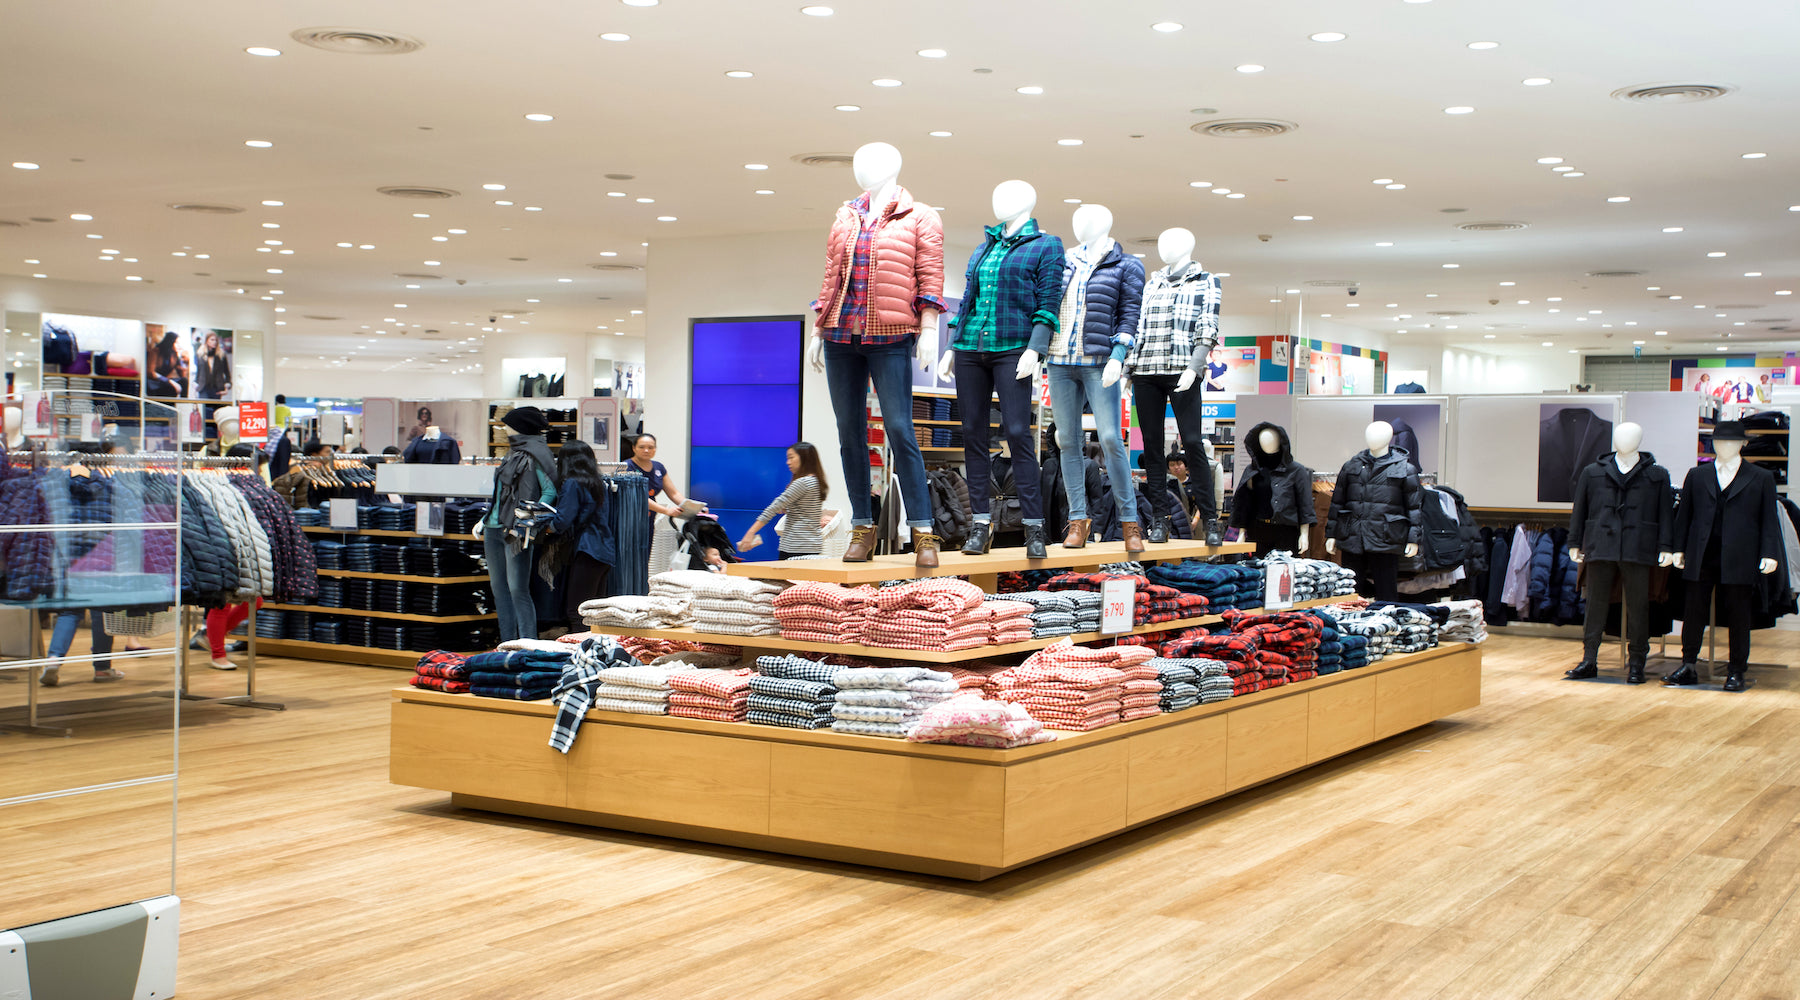 Retail Lighting | Retail Lights and LED Retail Lighting Fixtures